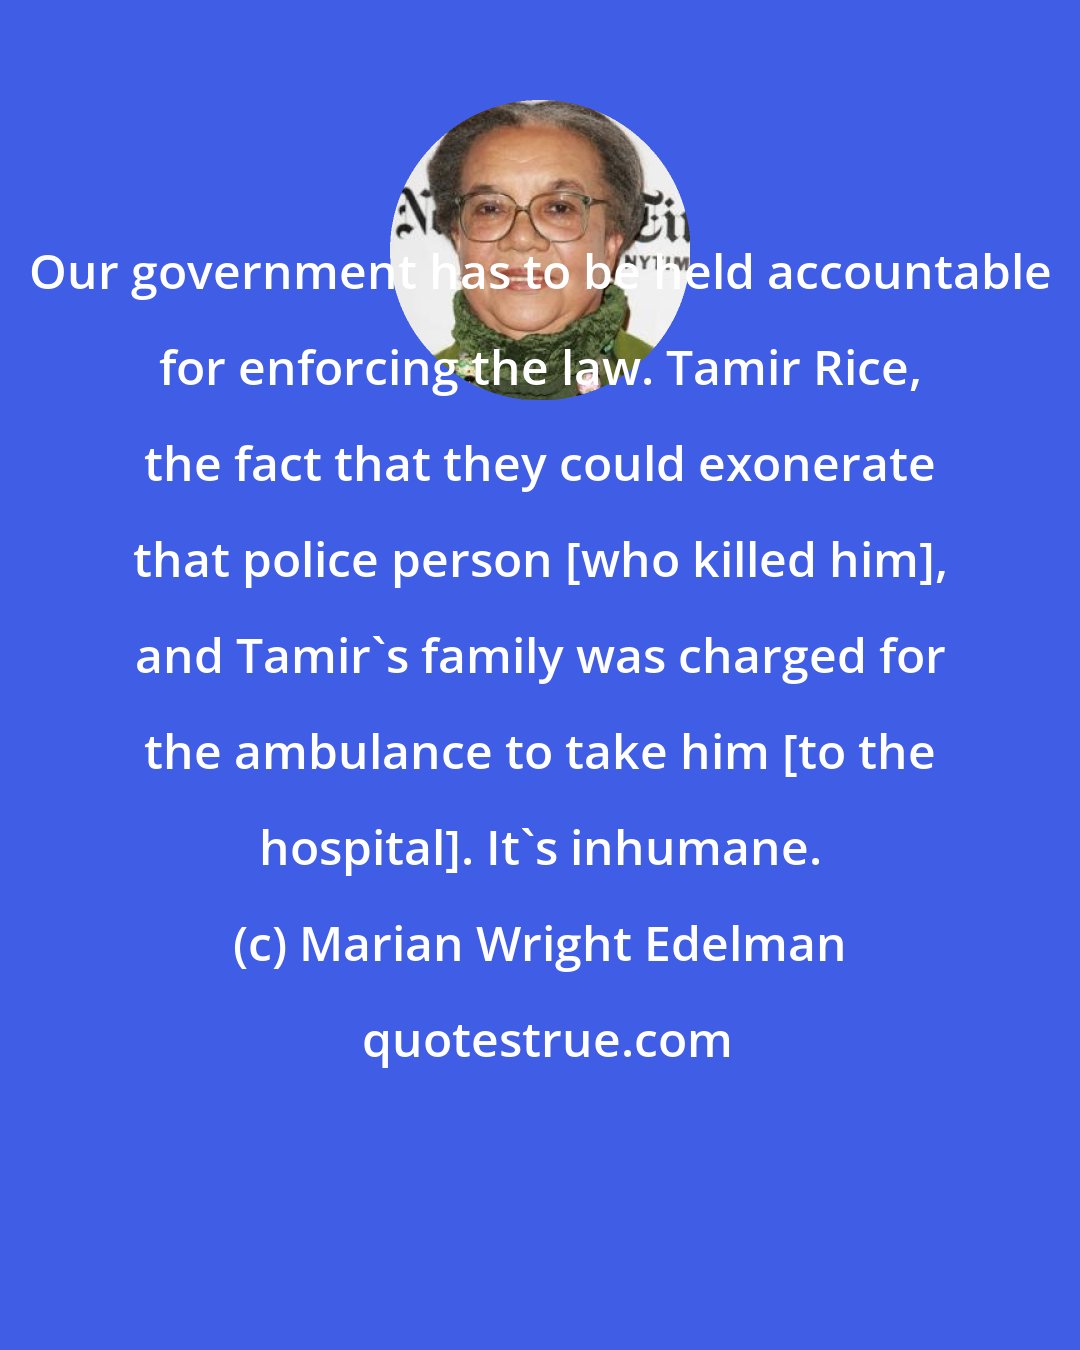 Marian Wright Edelman: Our government has to be held accountable for enforcing the law. Tamir Rice, the fact that they could exonerate that police person [who killed him], and Tamir's family was charged for the ambulance to take him [to the hospital]. It's inhumane.